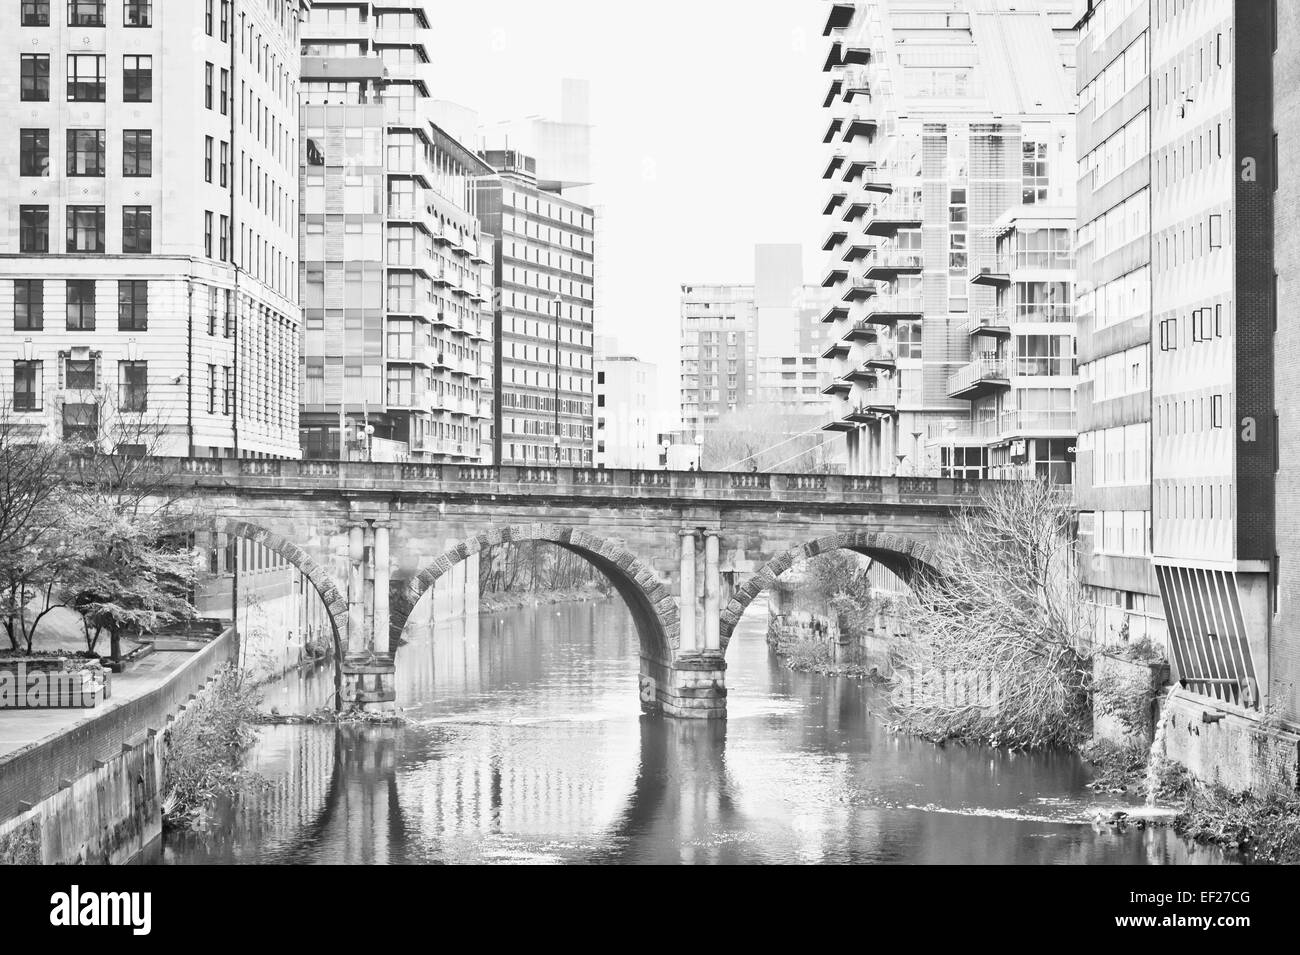 Bridge over a canal in Manchester with modern buildings Stock Photo